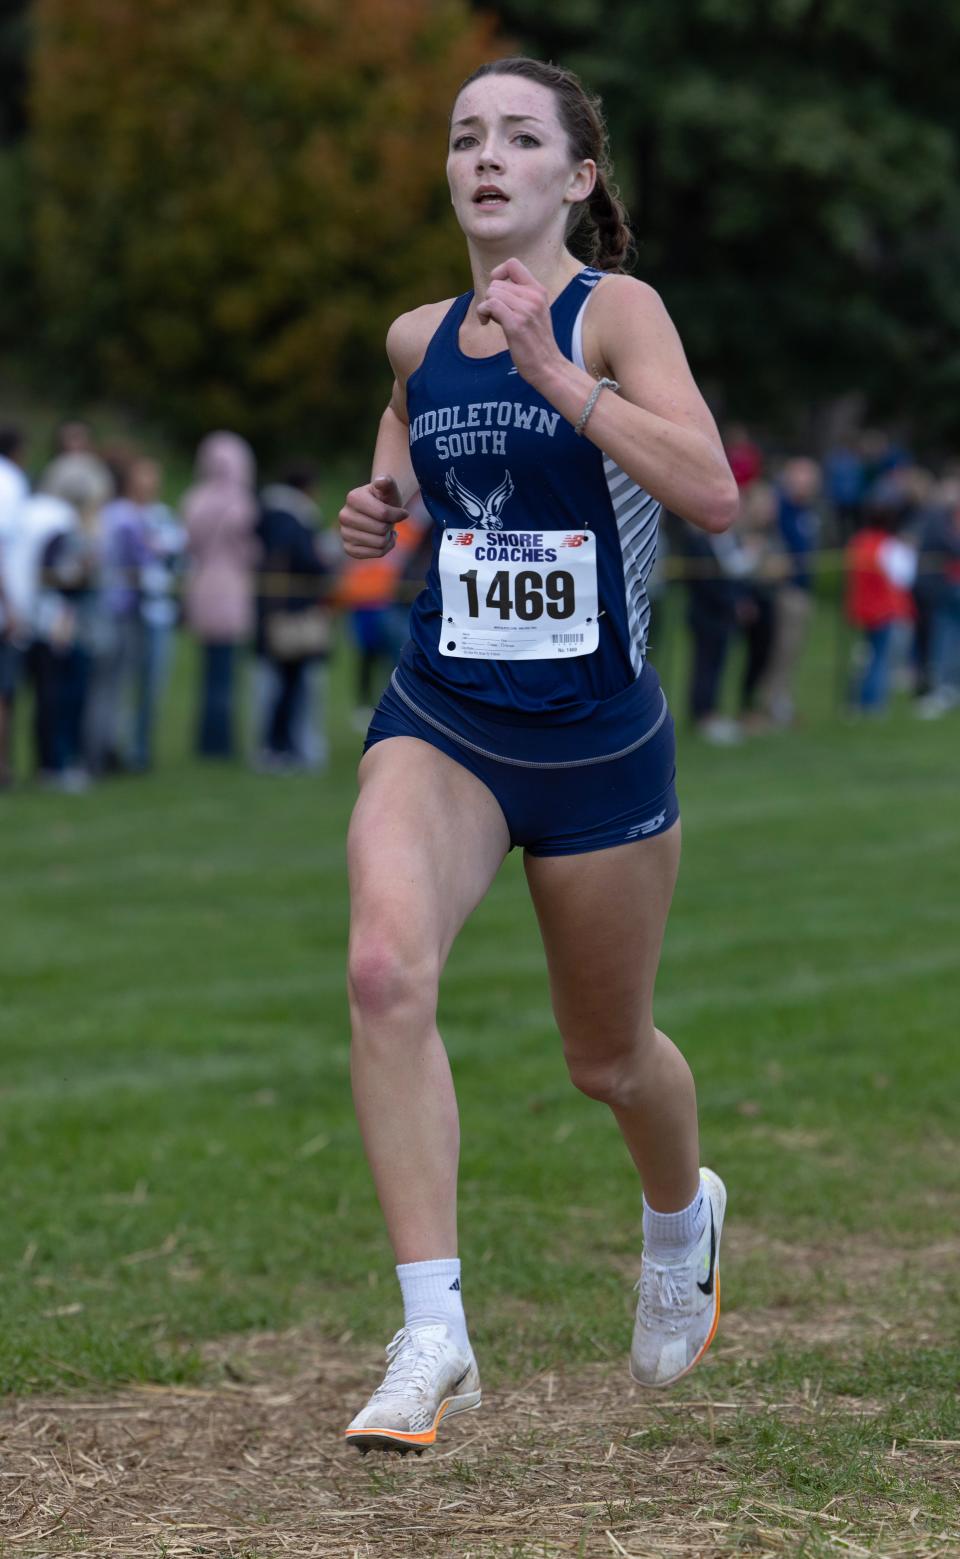 Rosemary Shay of Middletown South took second in the Grisl Varsity Race at the Monmouth County Cross Country Championships at Holmdel Park in Holmdel, NJ on October 10, 2023.